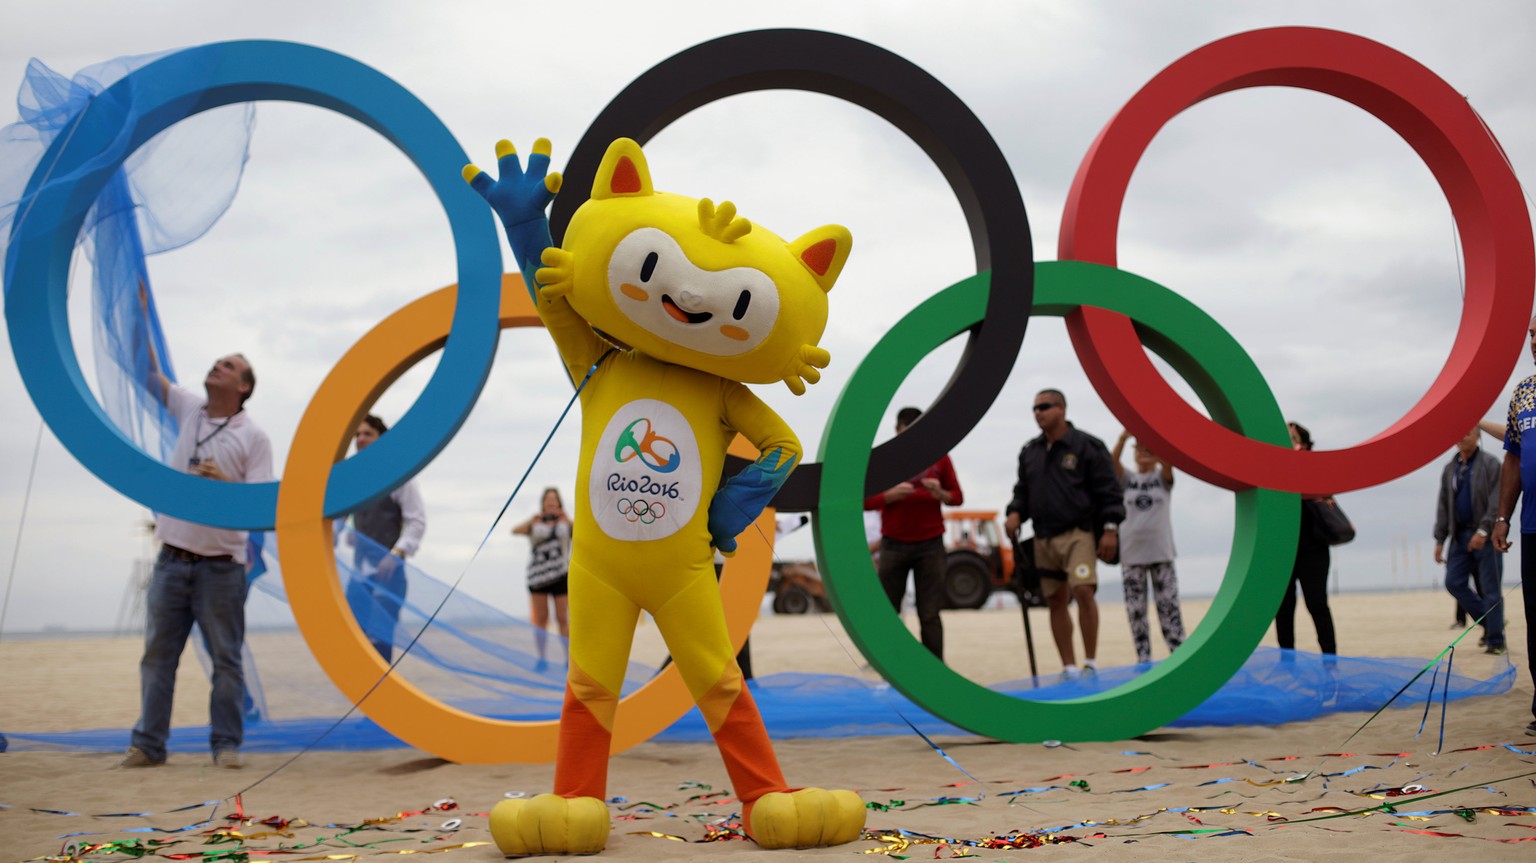 The 2016 Rio Olympics mascot Vinicius attends the inauguration ceremony of the Olympic Rings placed at the Copacabana Beach in Rio de Janeiro, Brazil, July 21, 2016. REUTERS/Ricardo Moraes